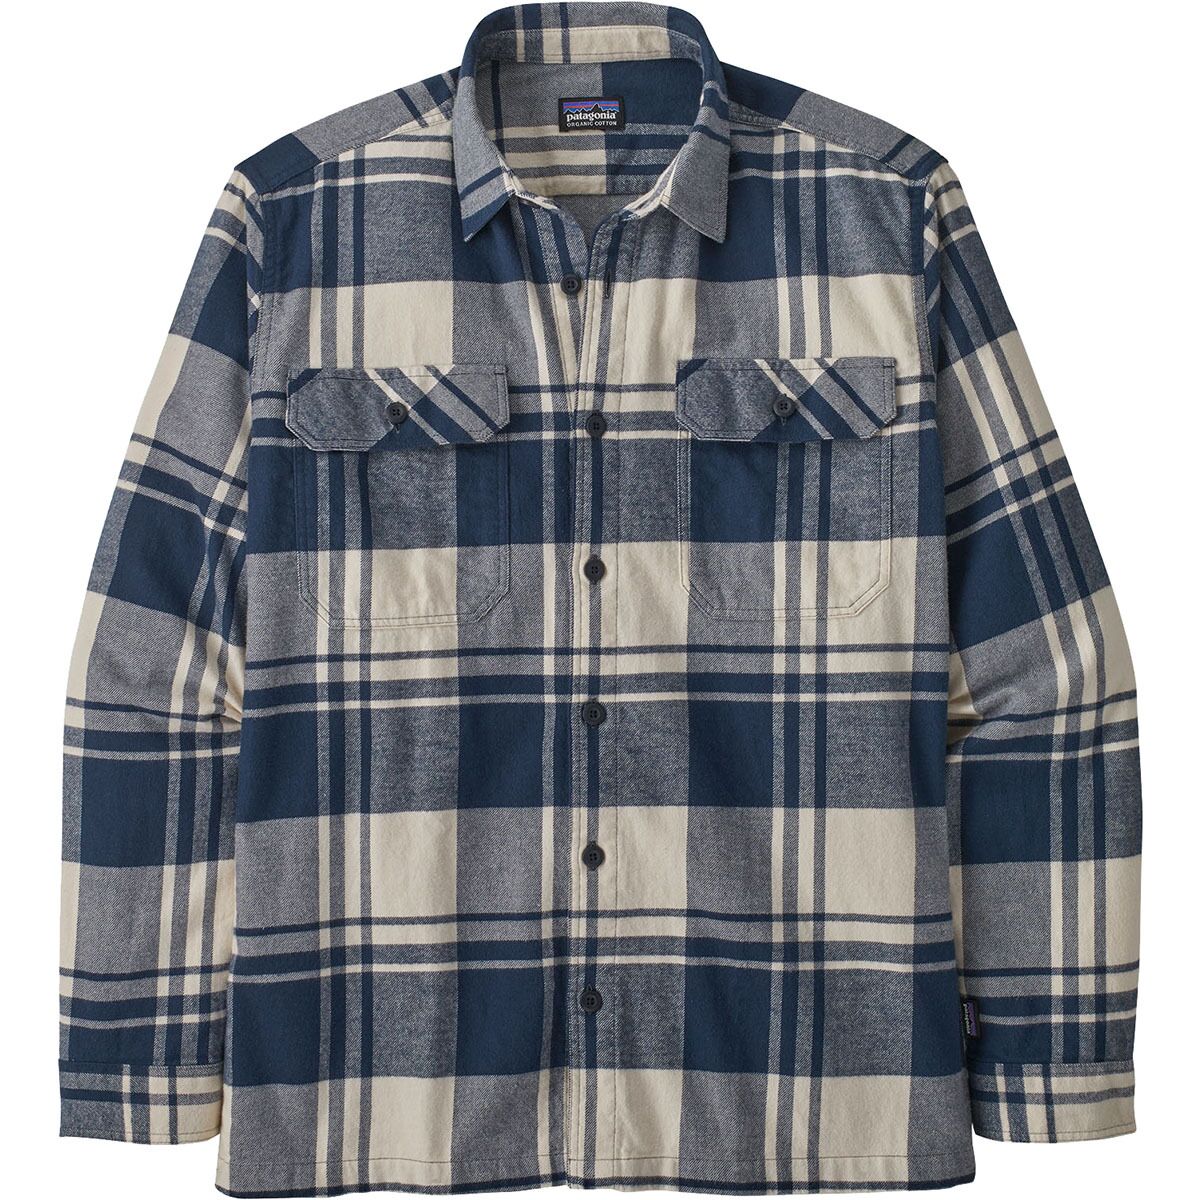 Outdoors with Pokémon Navy Plaid Fitted Flannel Shirt - Men